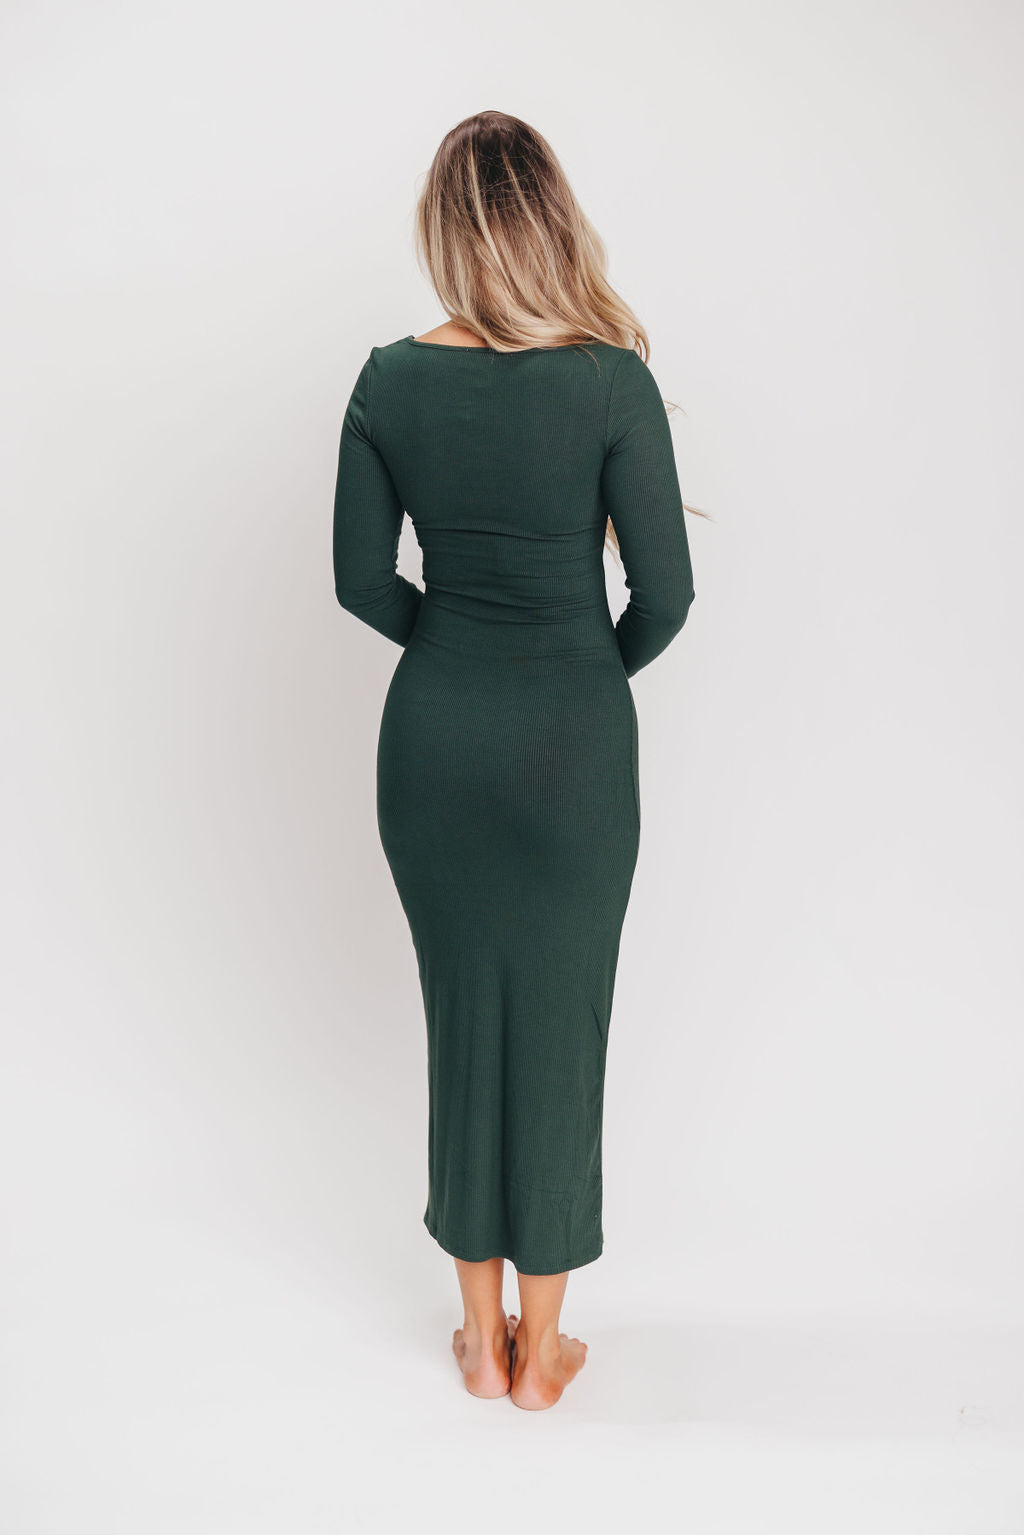 Tessa Ribbed Square Neck Midi Dress with Long Sleeves in Deep Pine